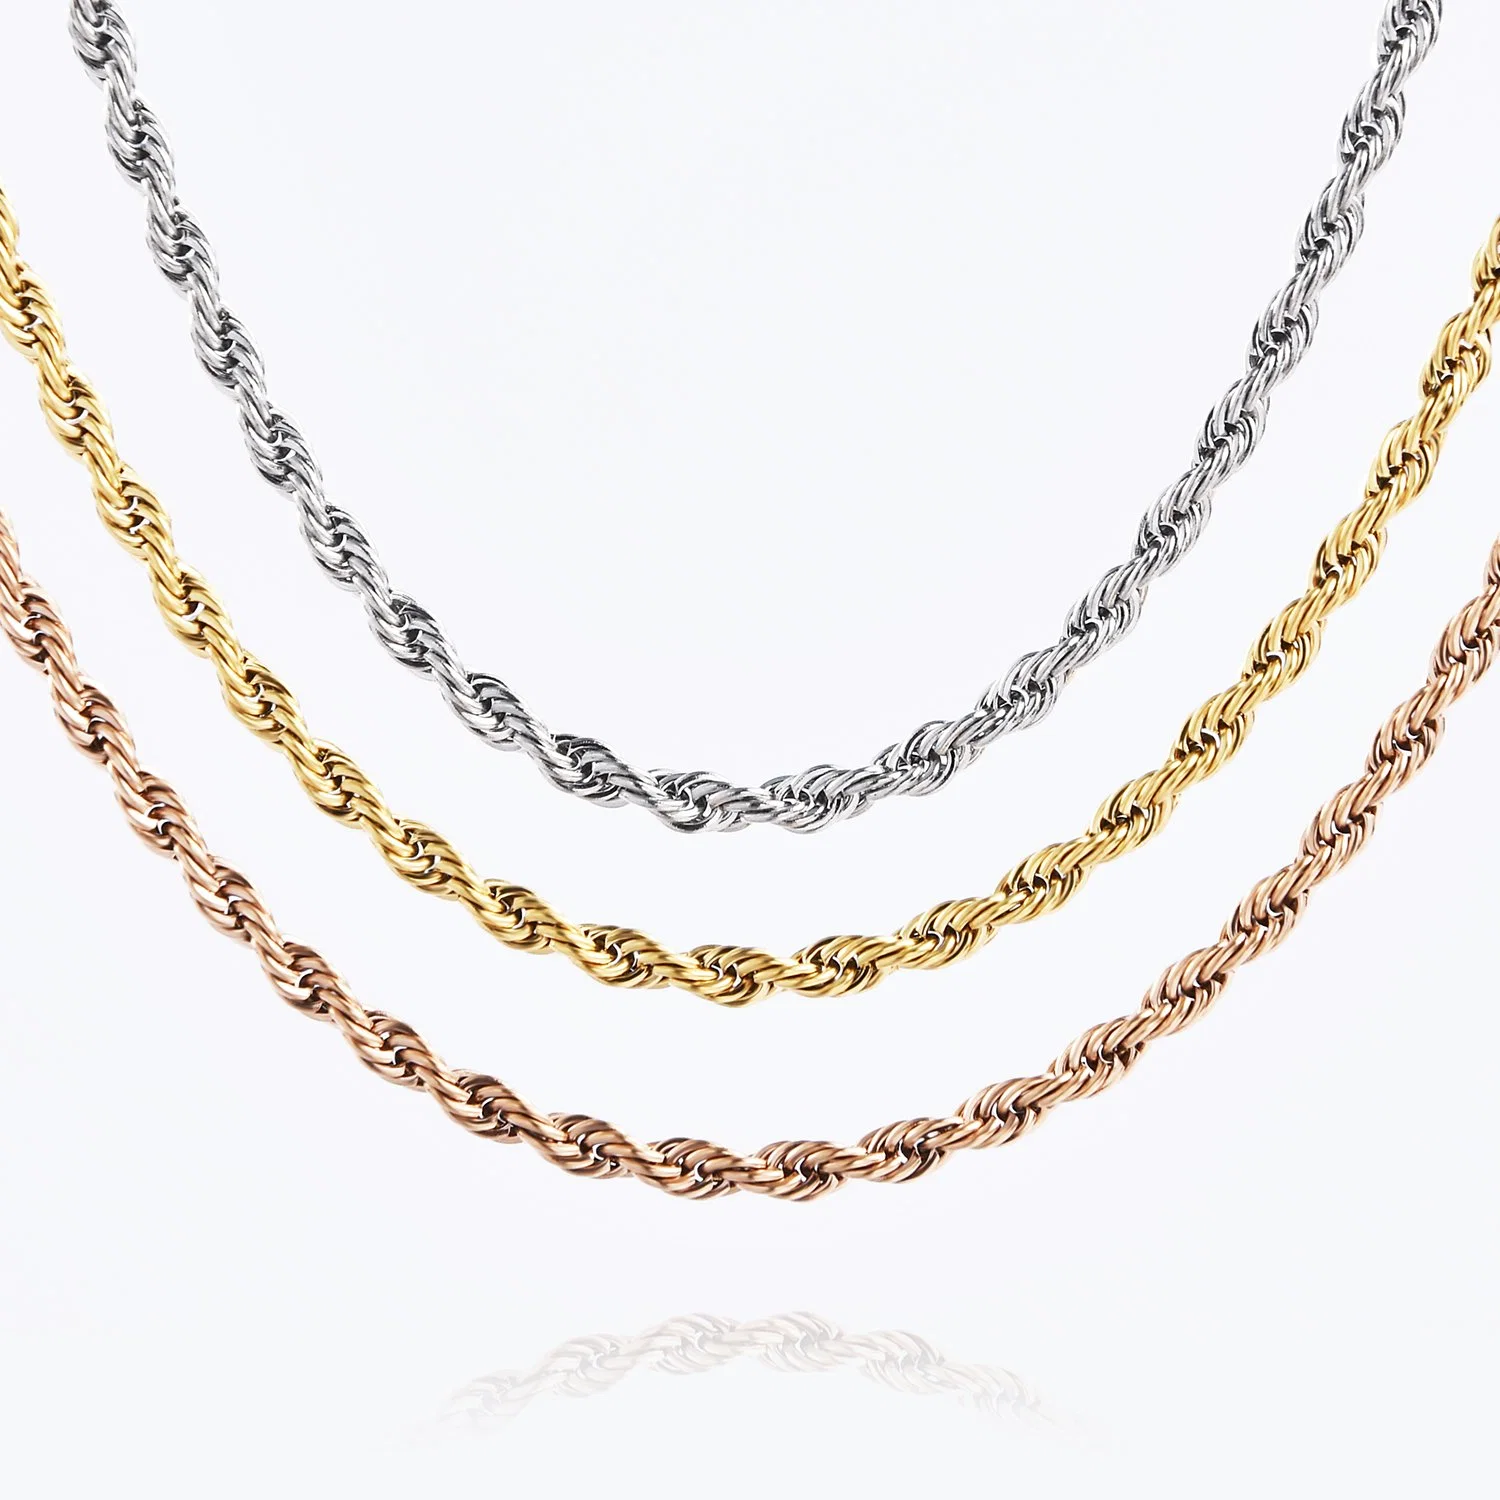 Wholesale Fashionable Accessories 18K Gold Plated Rope Chain for Bracelet Anklet Layering Necklace Jewellery Design